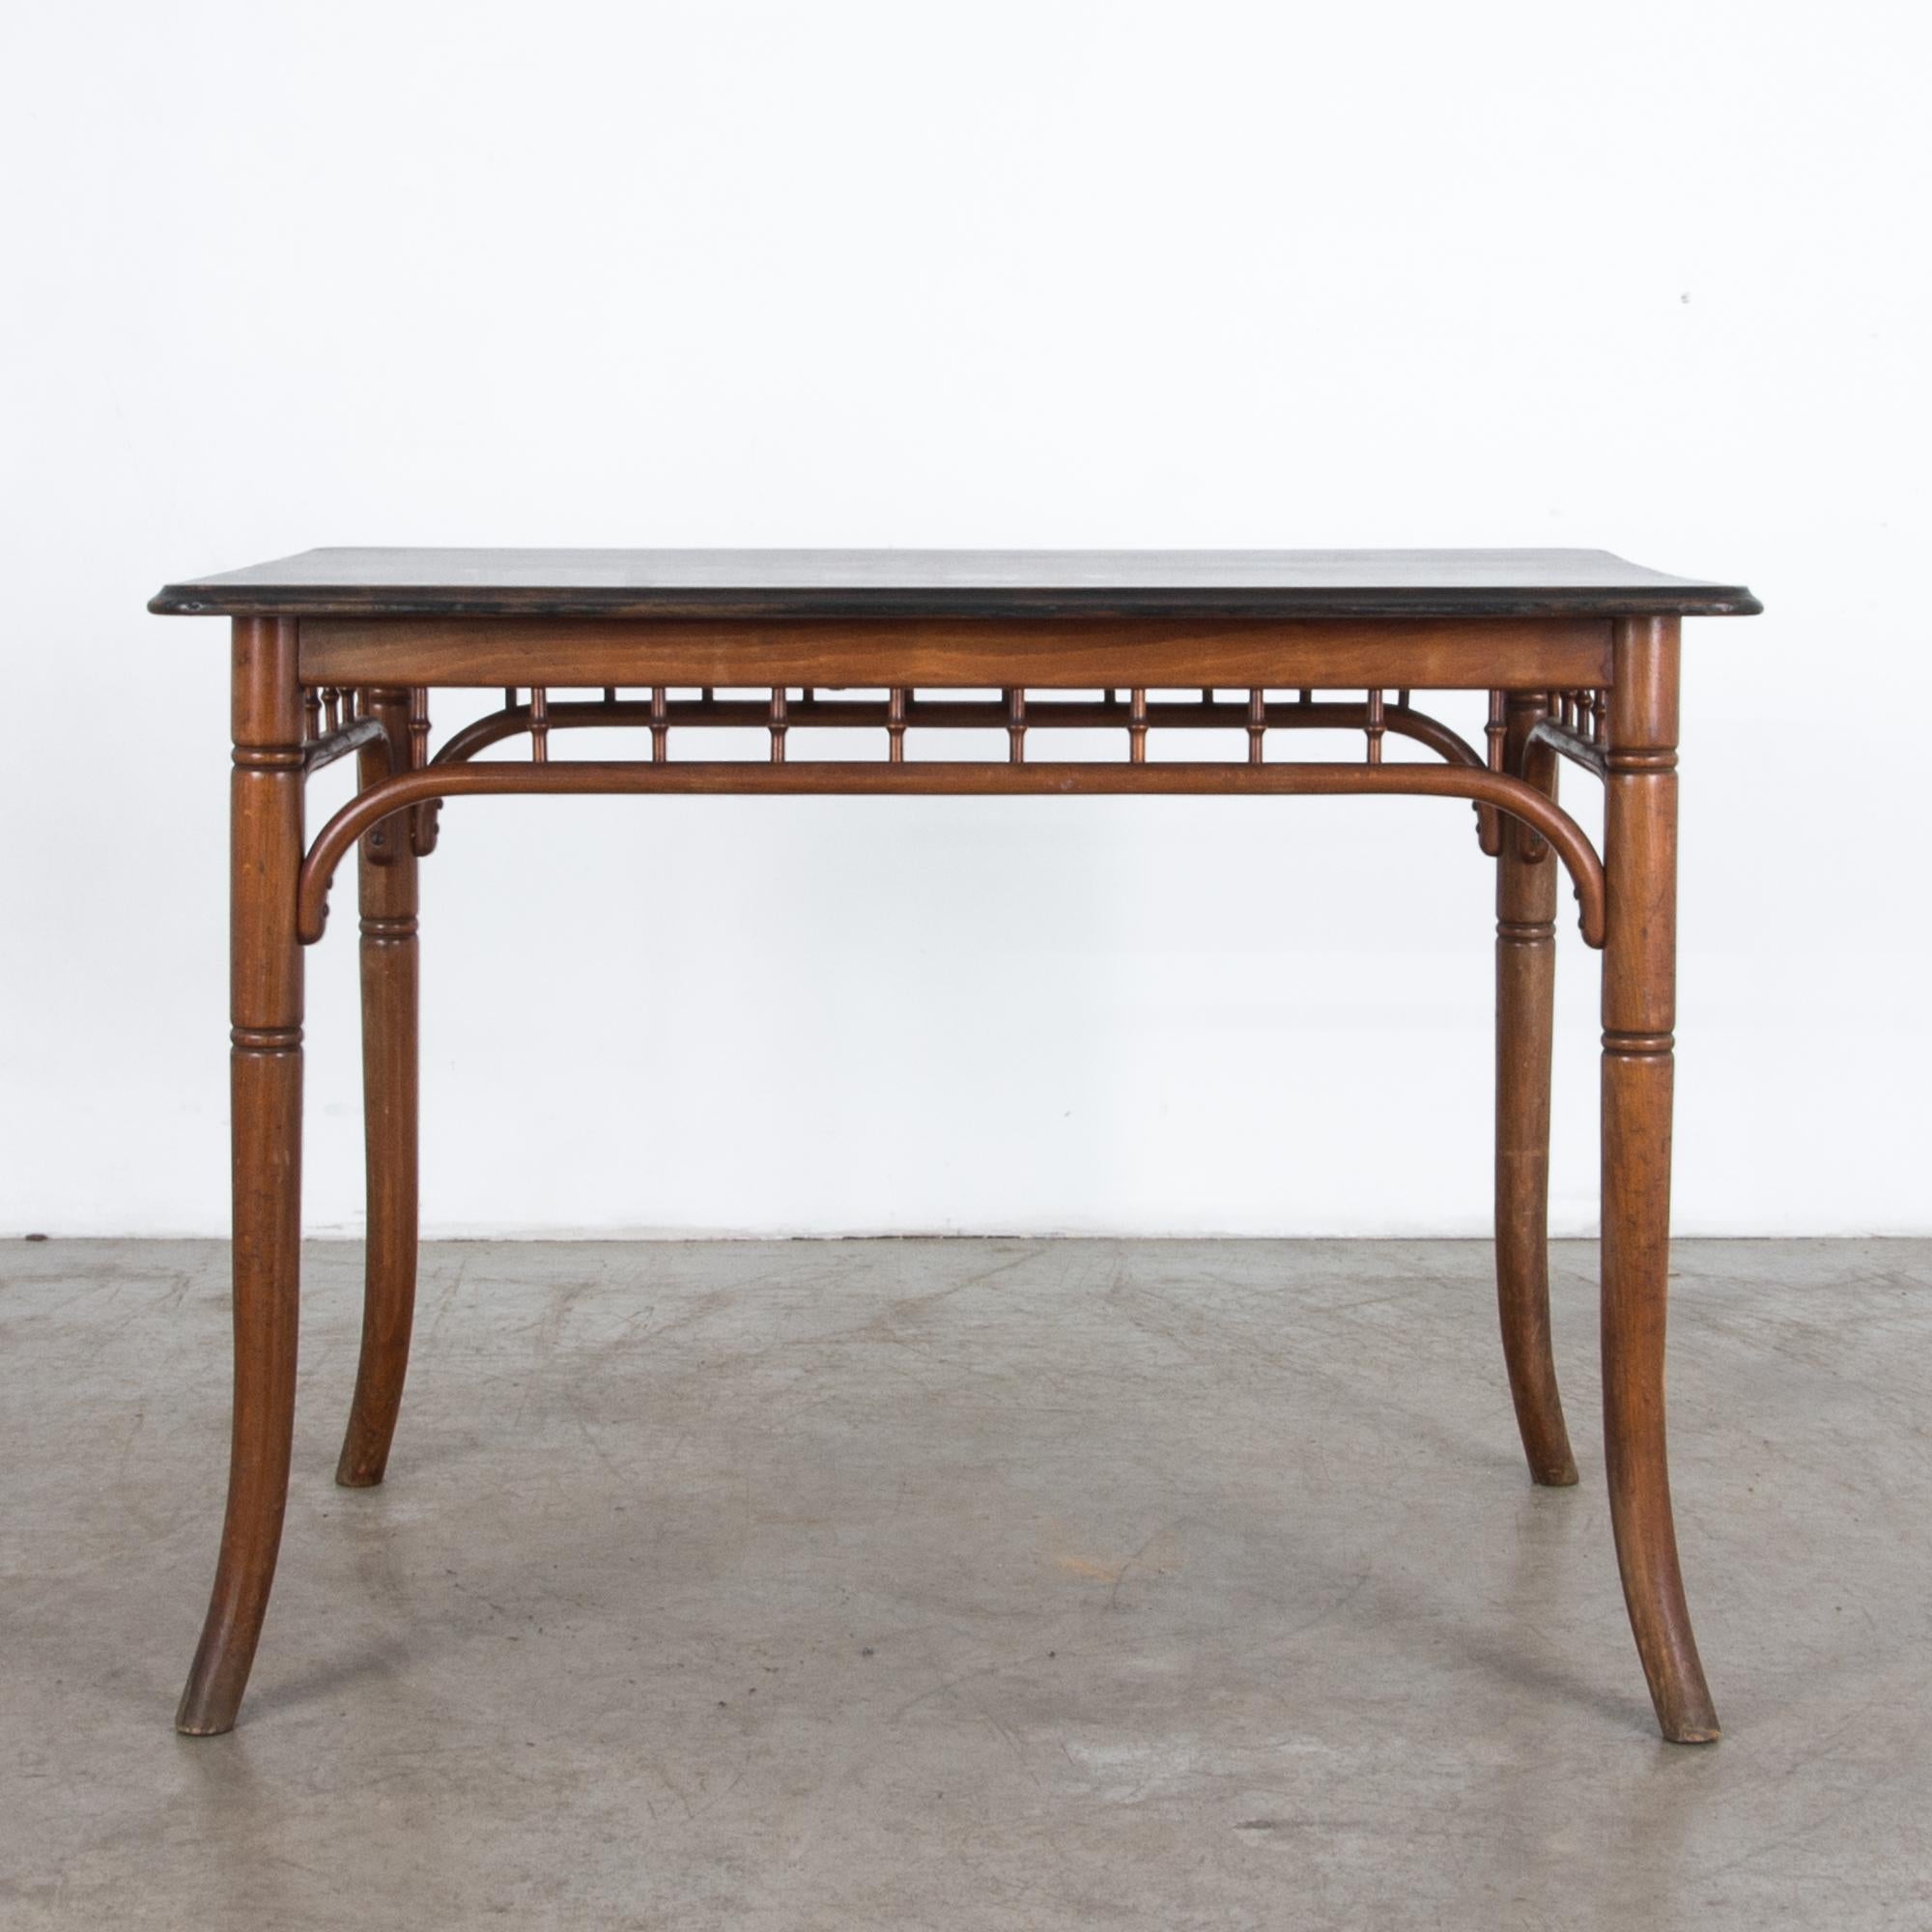 From Austria circa 1900, this wooden table is attributed to Thonet, a pioneering maker of high volume furniture production in Central Europe. Bent wooden legs and supports give an elegant curve in this piece, complimented by subtle carved